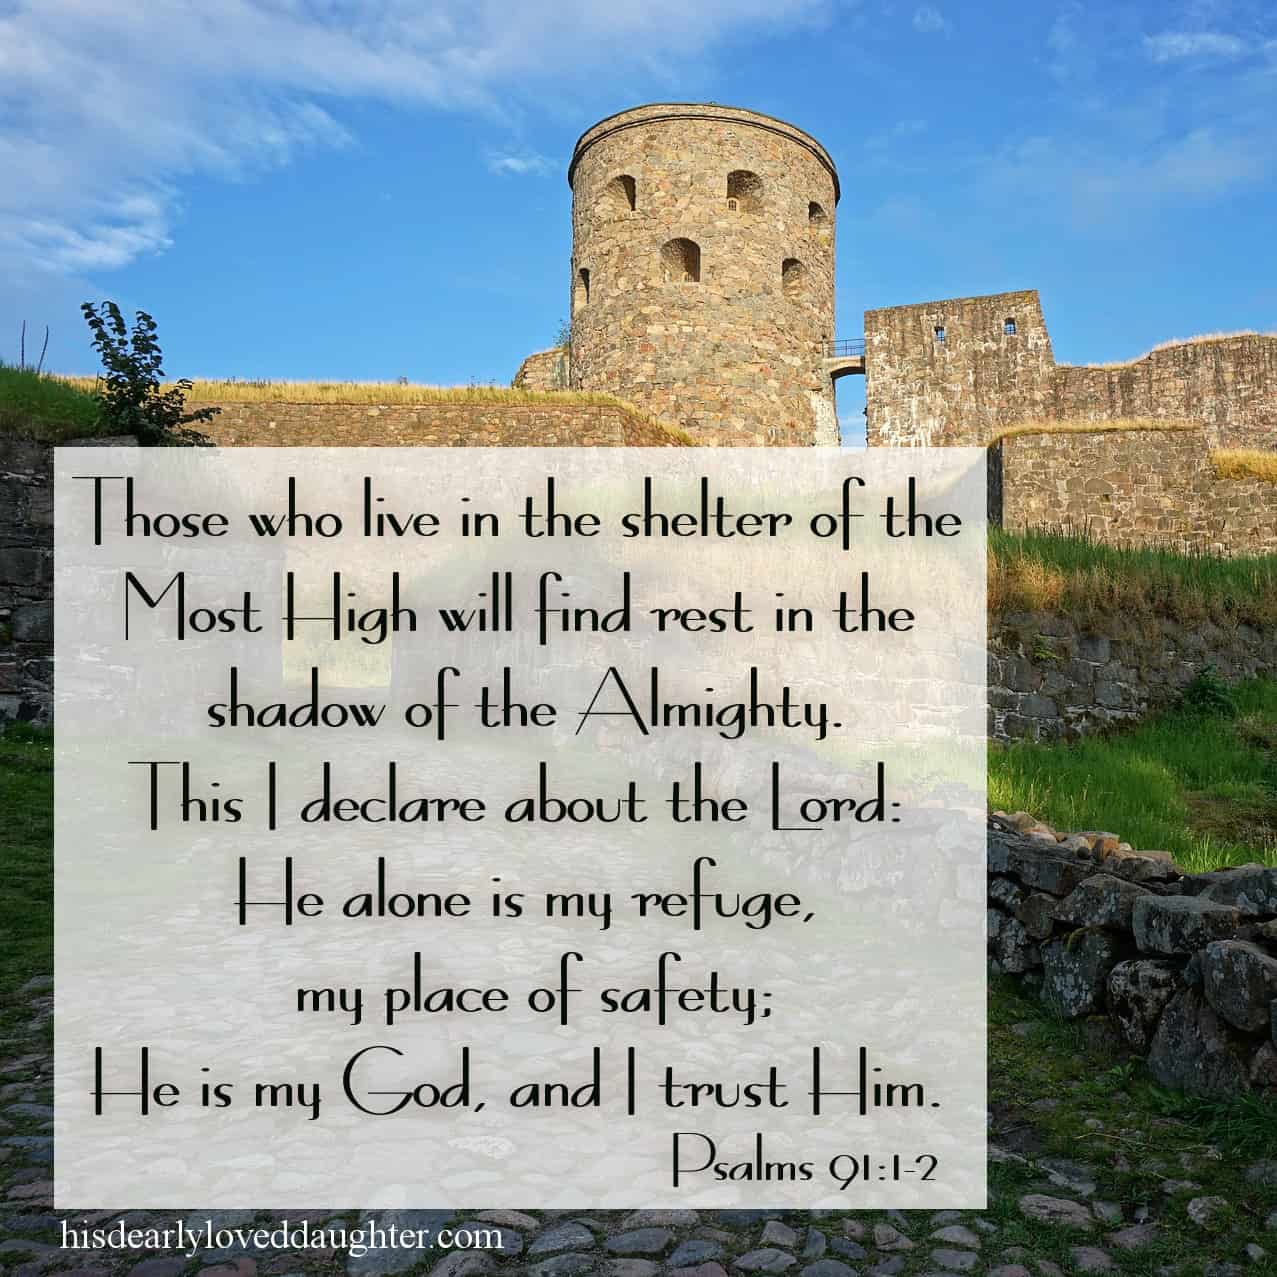 Those who live in the shelter of the Most High will find rest in the shadow of the Almighty. This I declare about the Lord: He alone is my refuge, my place of safety; He is my God, and I trust Him. Psalms 91:1-2